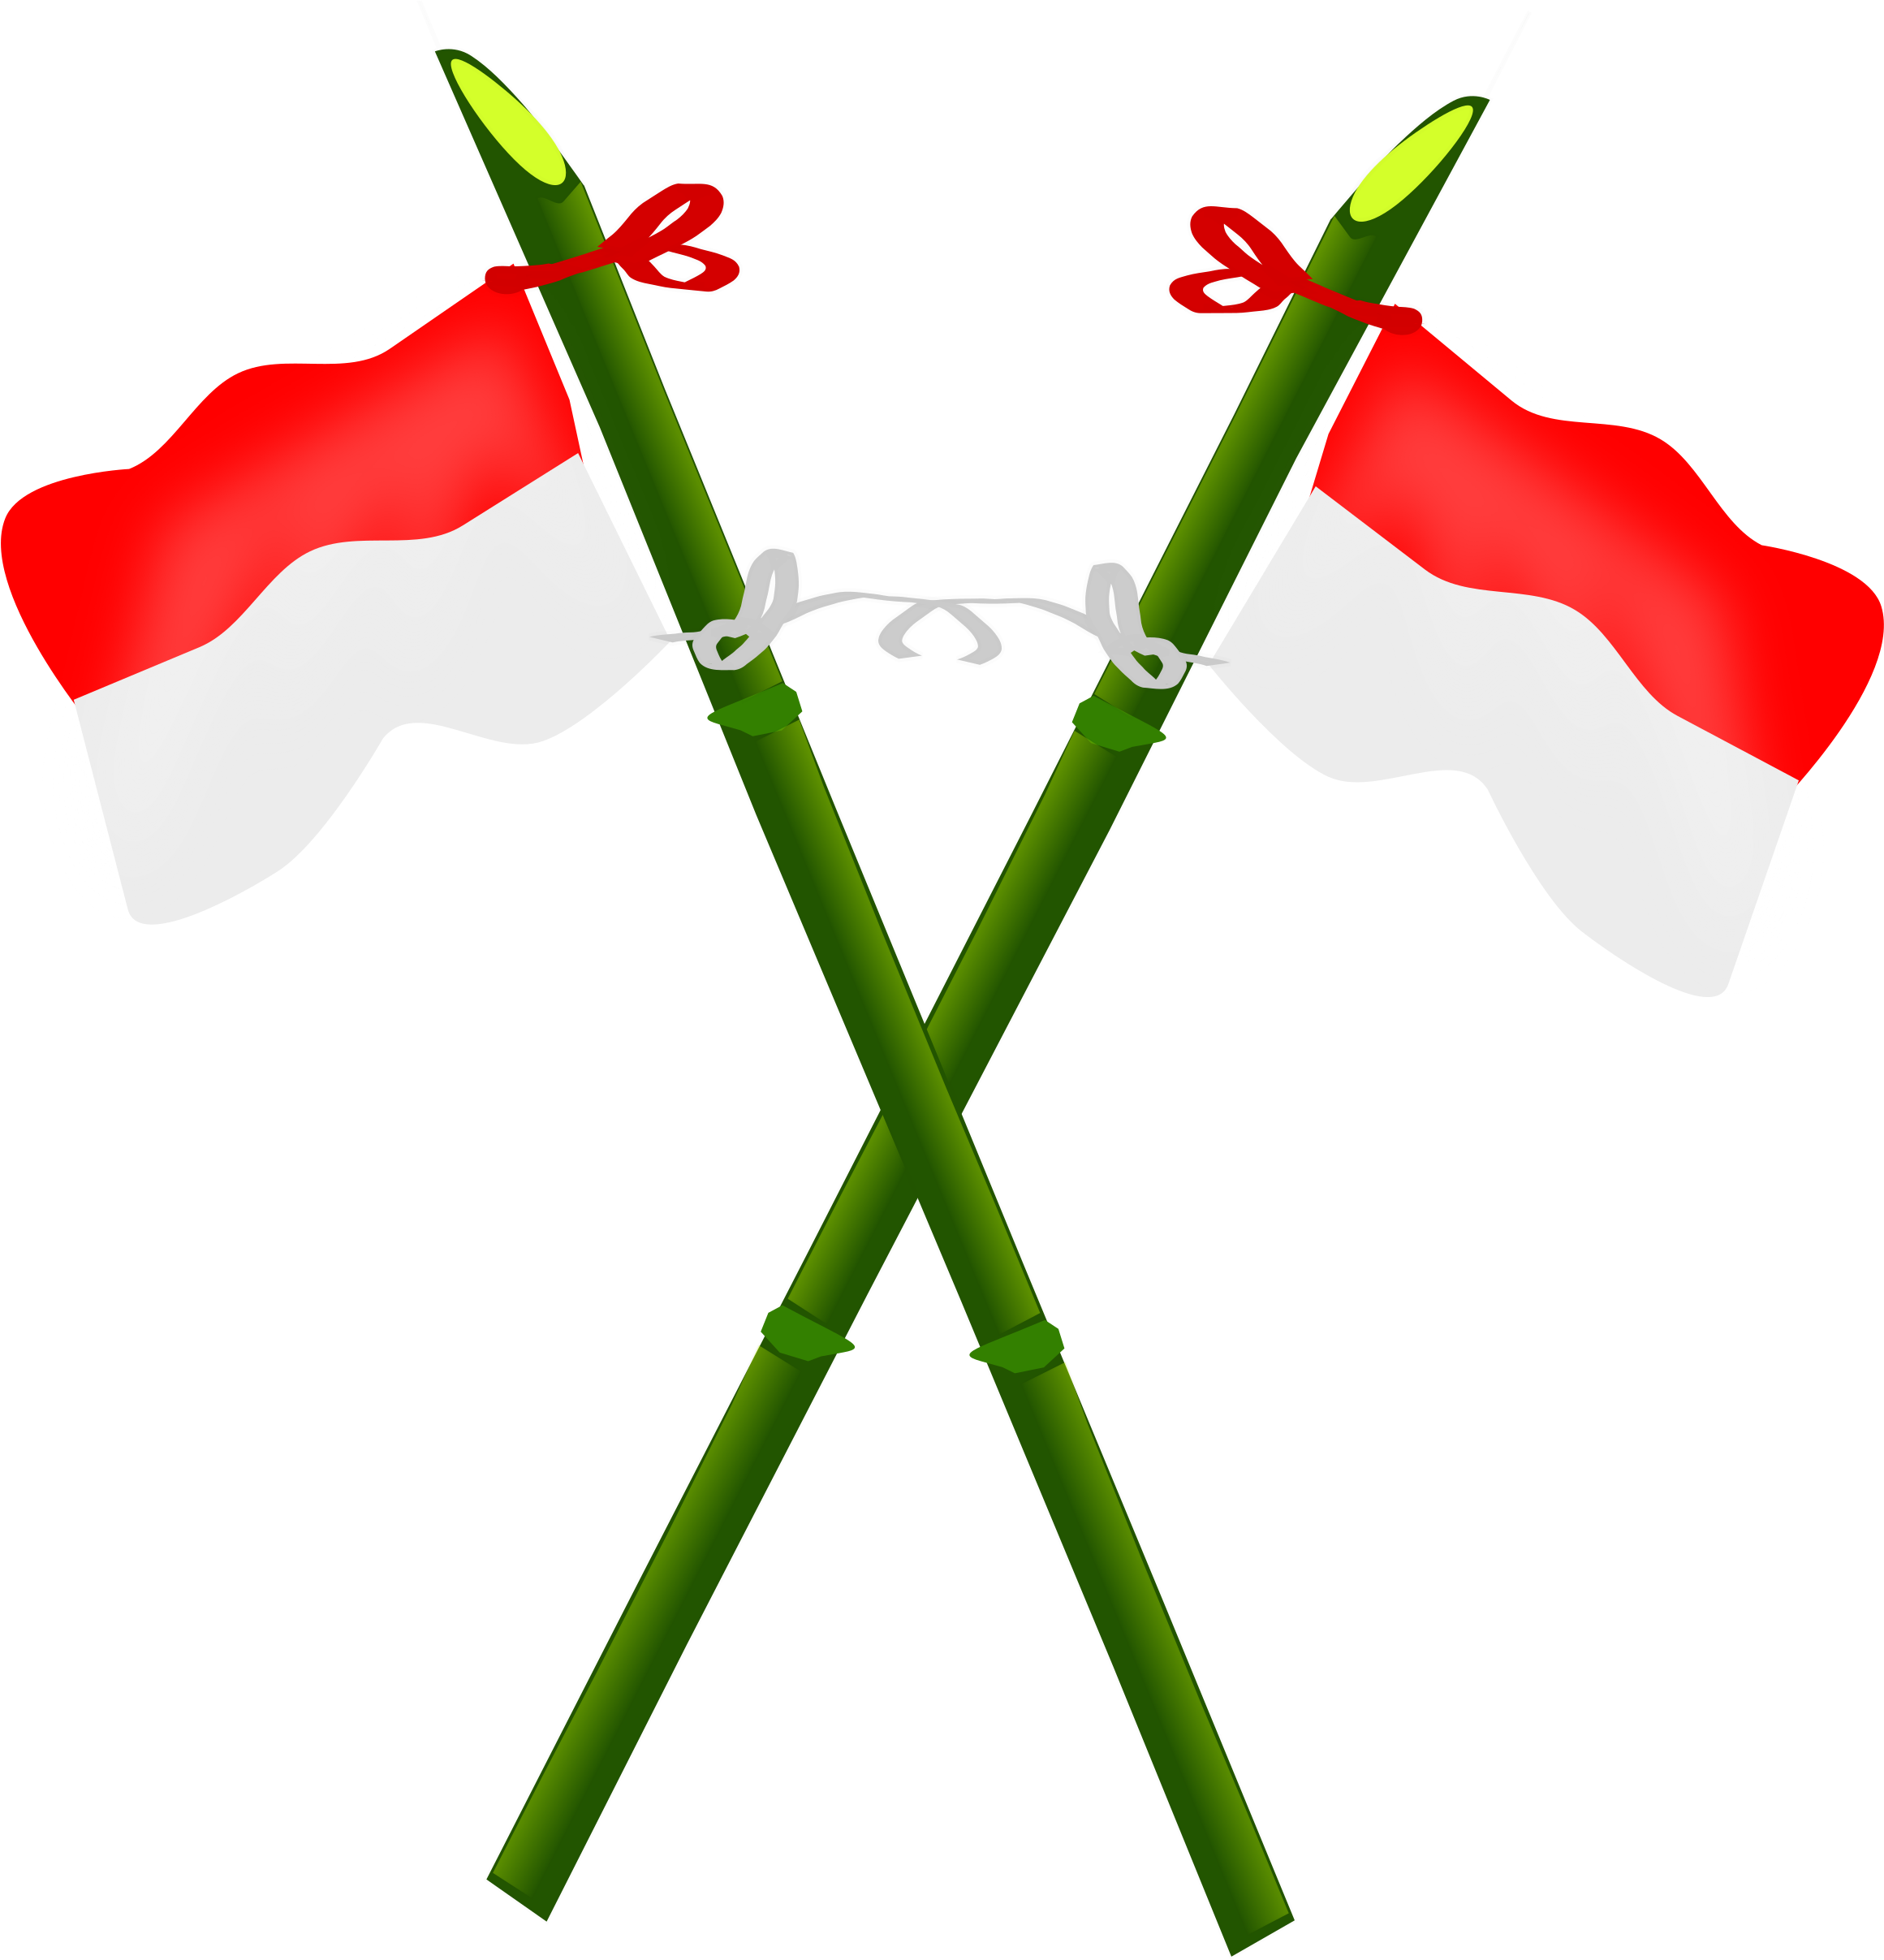 Bamboo And Indonesian Flag-2 - Indonesian Flag Clip Art (2400x2449)